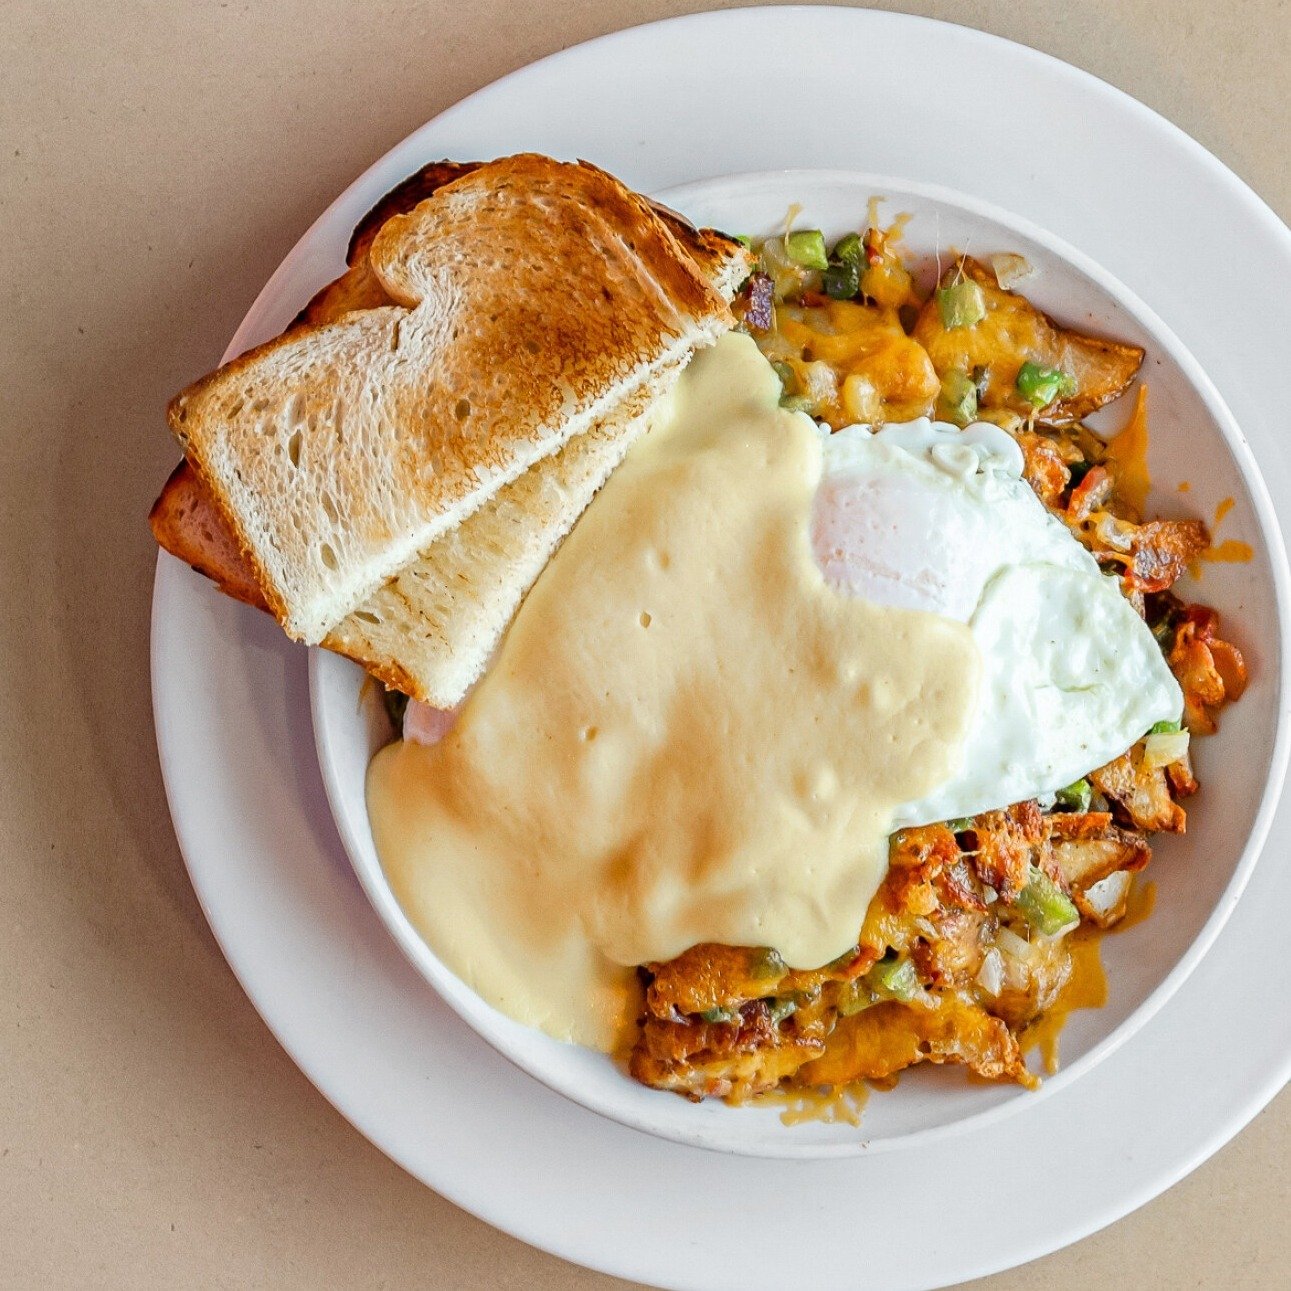 The perfect breakfast to start your day is our Roadside Skillet 😍 Two eggs your way served on top of homies, onions, peppers, bacon, cheddar cheese, topped with hollandaise sauce &amp; served with a side of toast